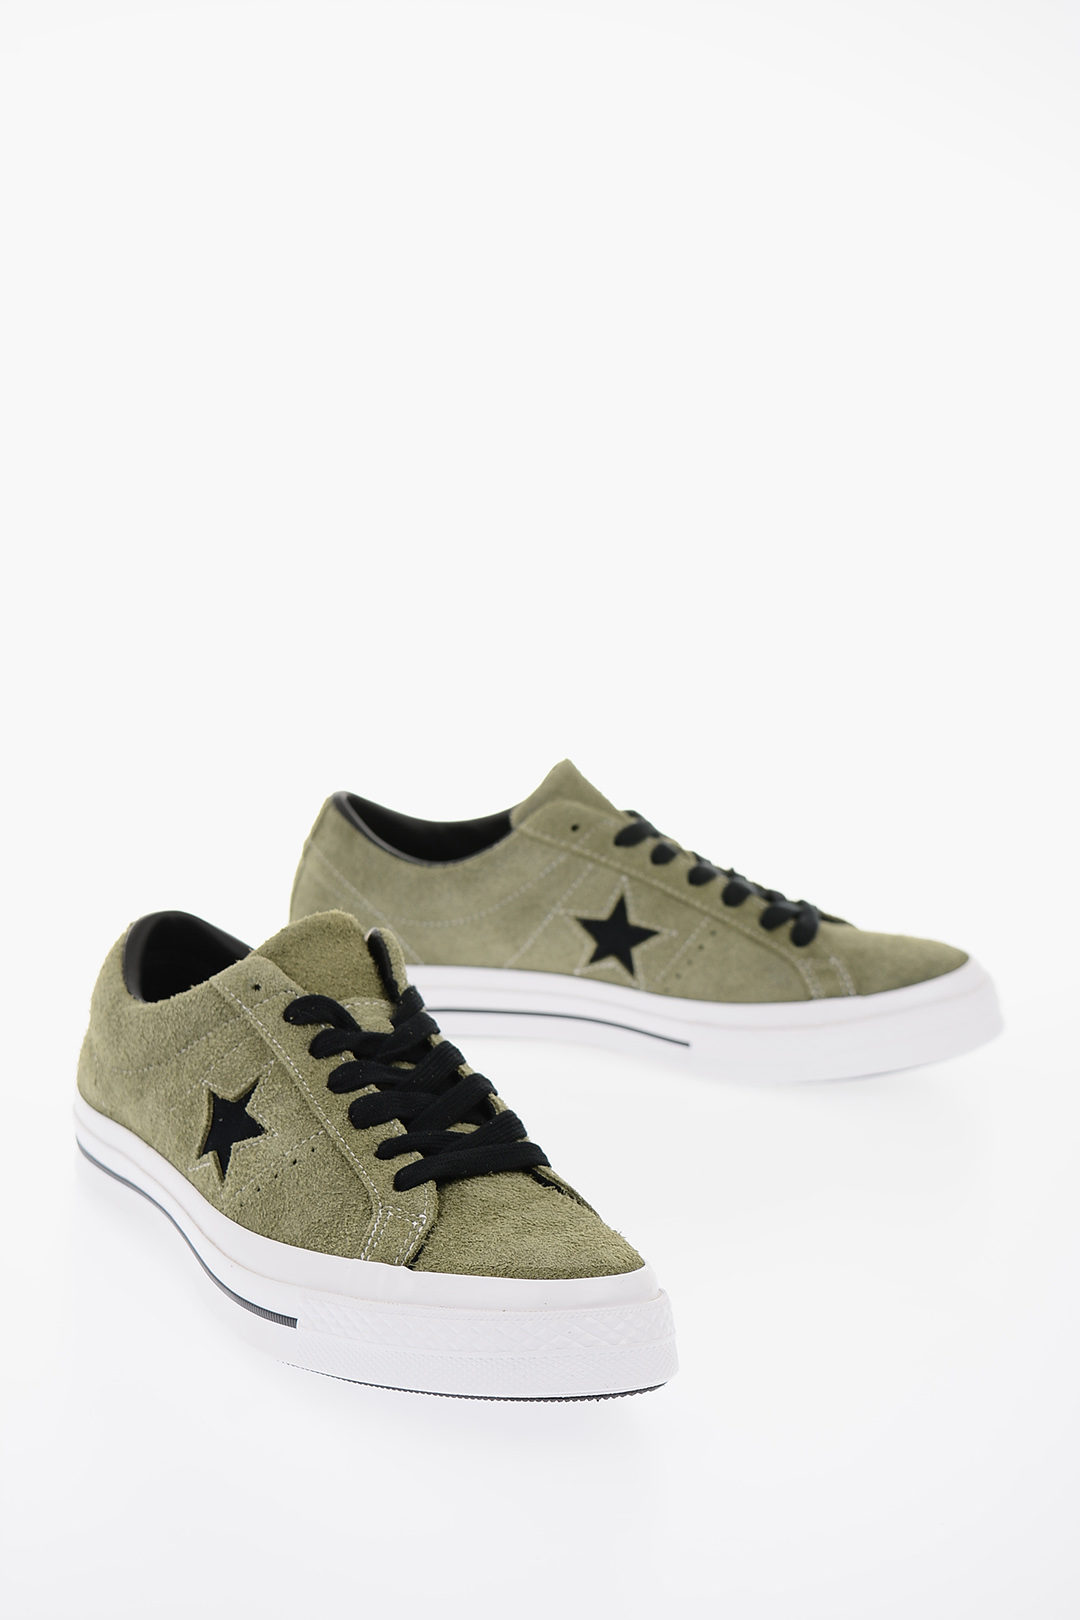 converse one star suede ph